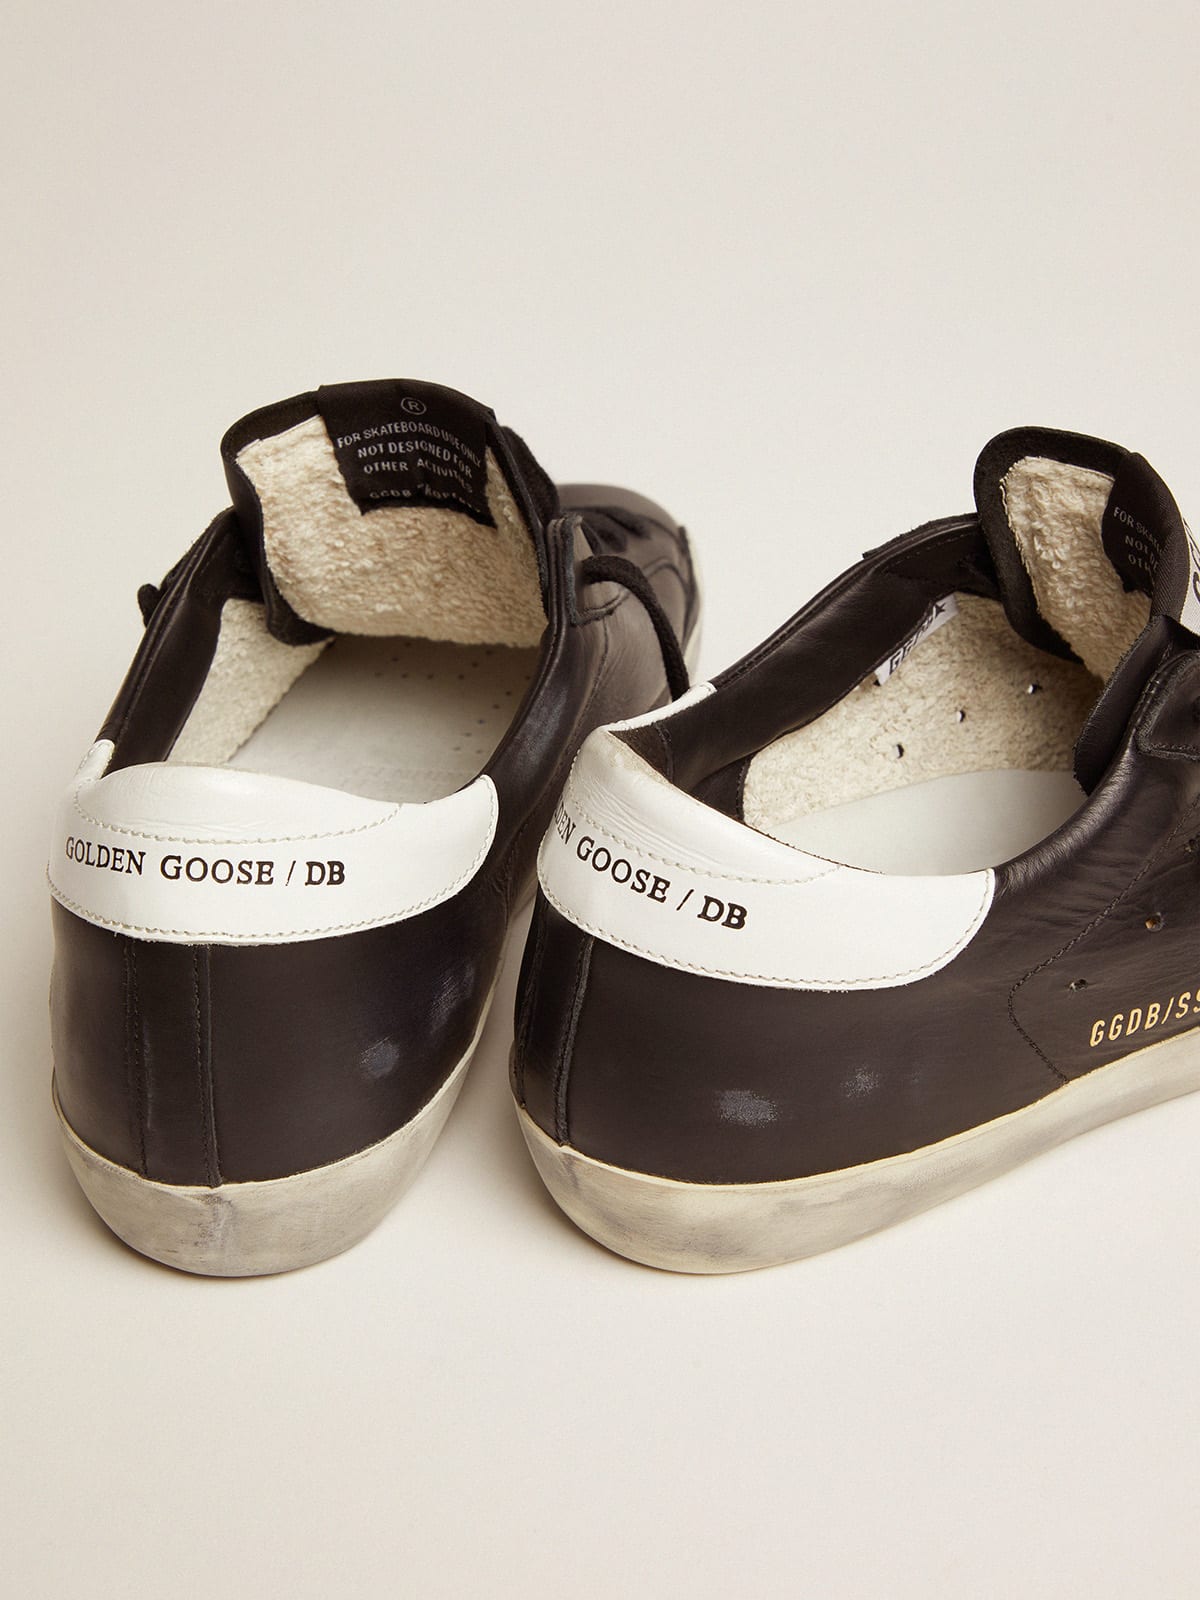 Superstar sneakers in leather with contrast star and heel tab | Golden Goose